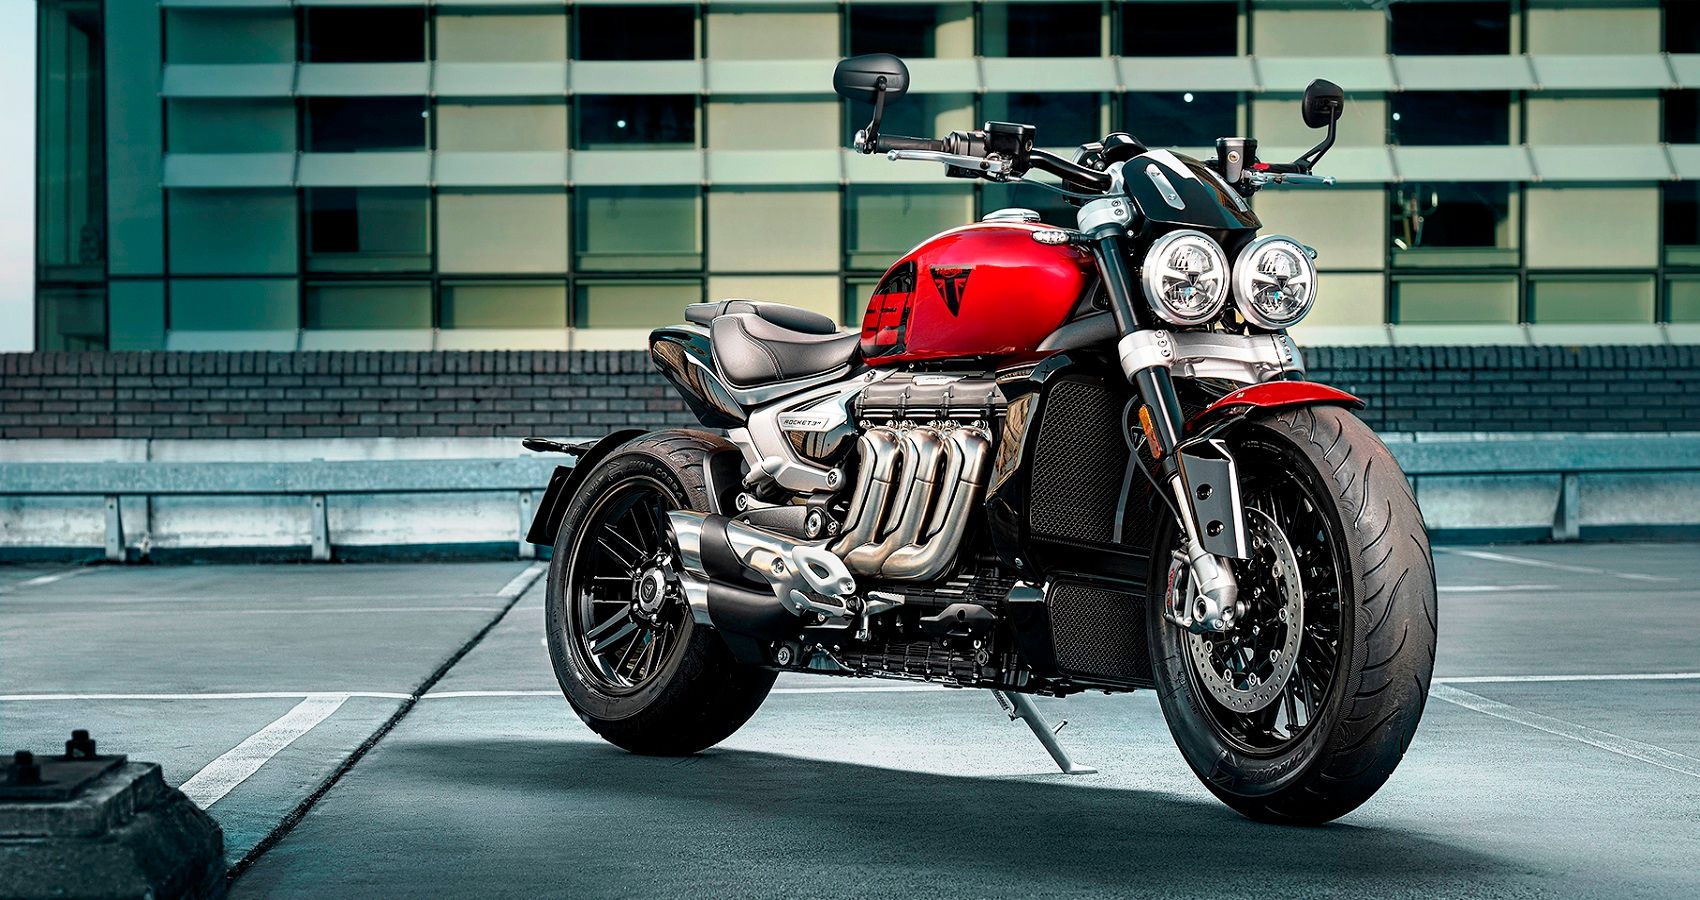 Why The Triumph Rocket 3 221 Special Edition Is The Most Impressive Bike Today